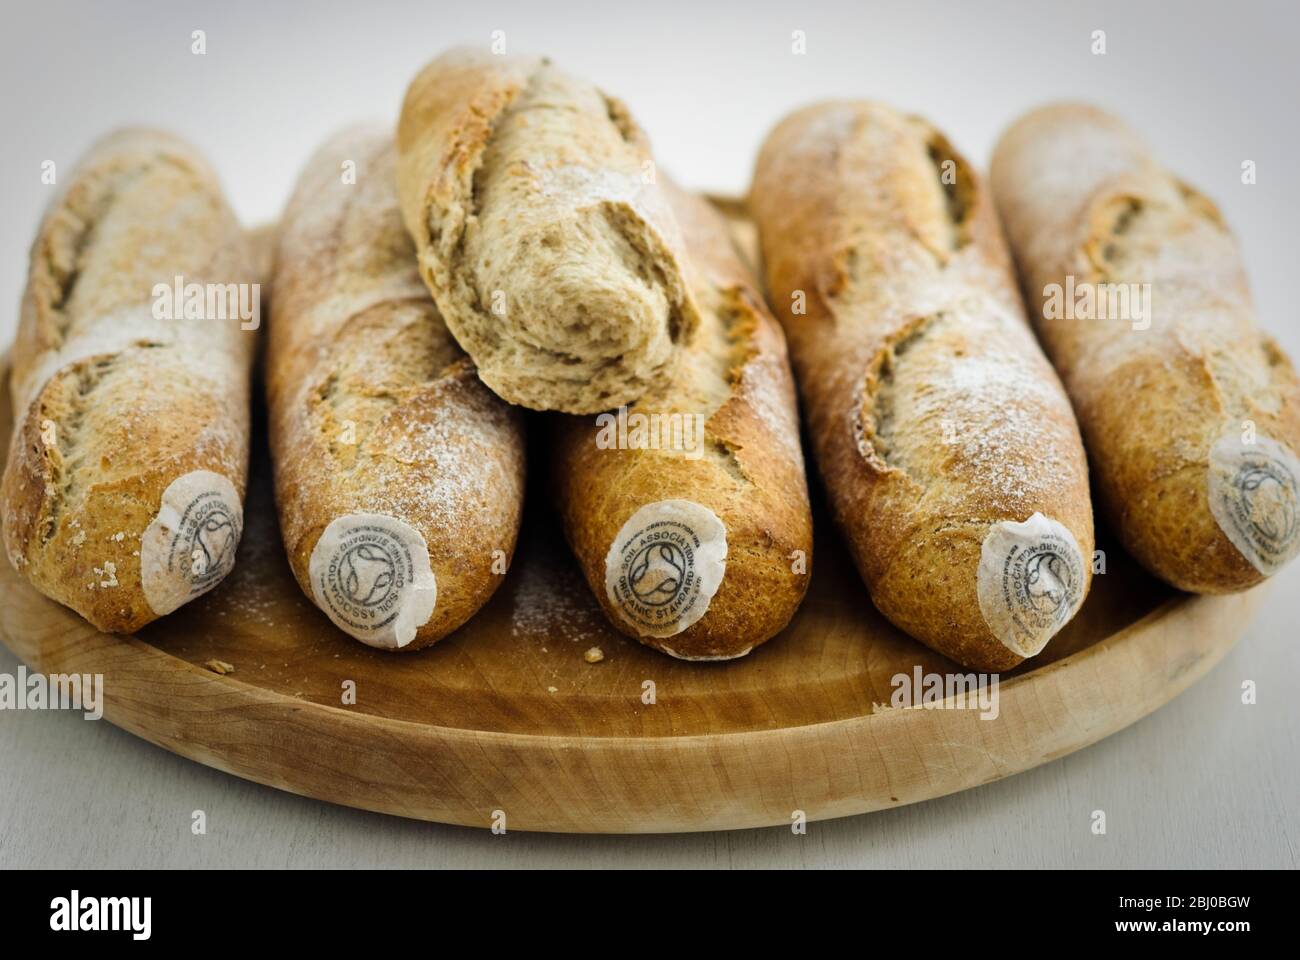 Pile of stoneground wholemeal organic baguettes on woden board - Stock Photo